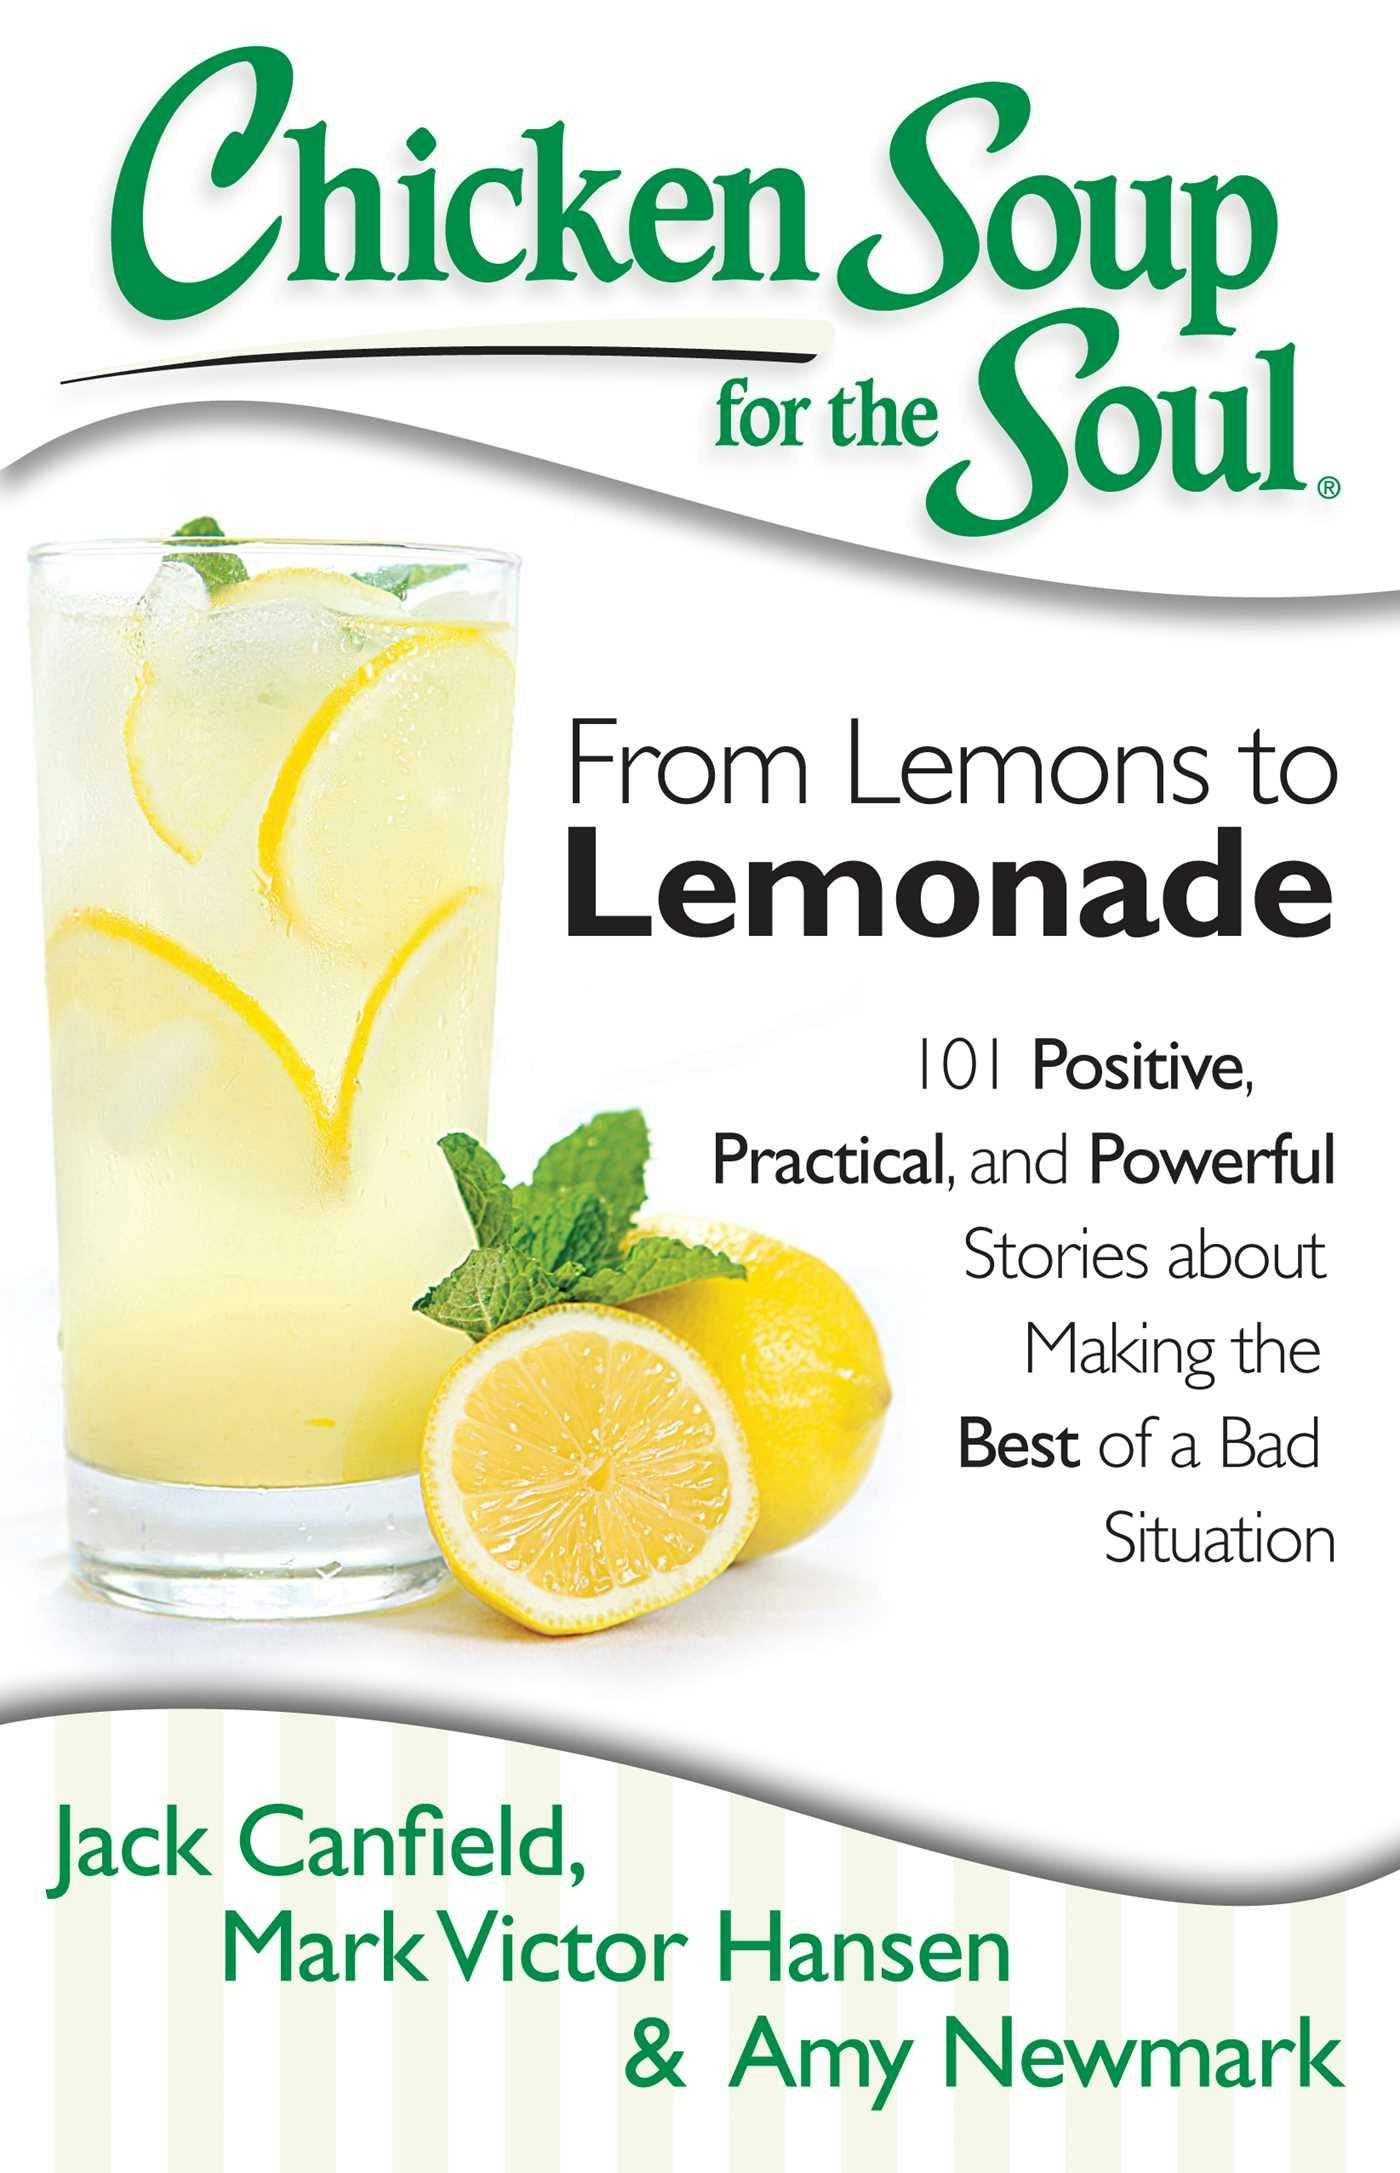 Chicken Soup for the Soul: From Lemons to Lemonade: 101 Positive, Practical, and Powerful Stories about Making the Best of a Bad Situation - Mark Victor Hansen, Jack Canfield, Amy Newmark